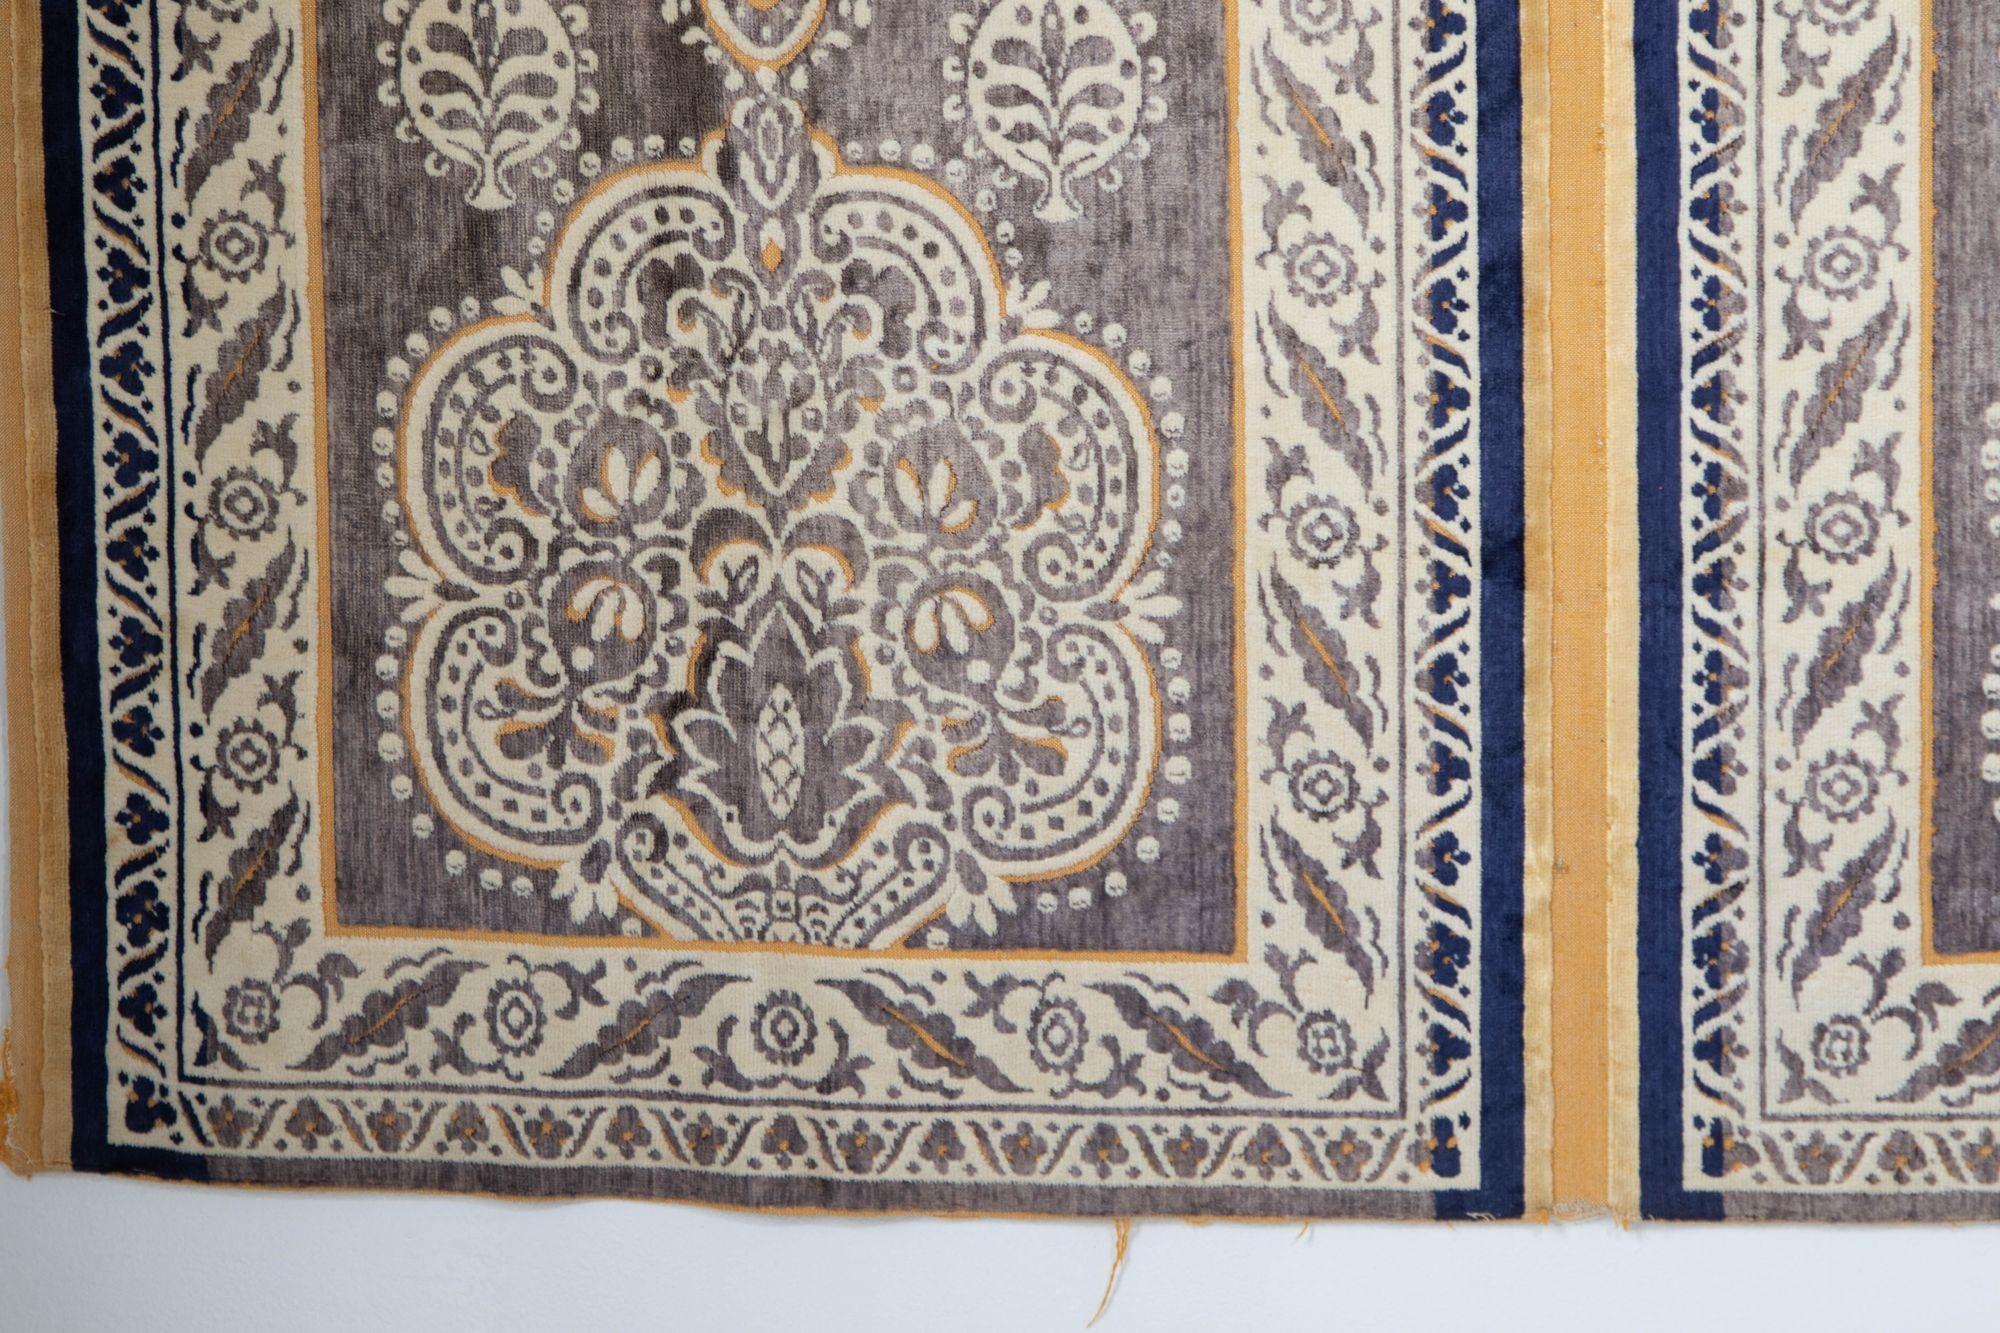 Antique Moroccan Moorish Silk Textile Tapestry Wall Hanging Hiti 19th C. For Sale 13